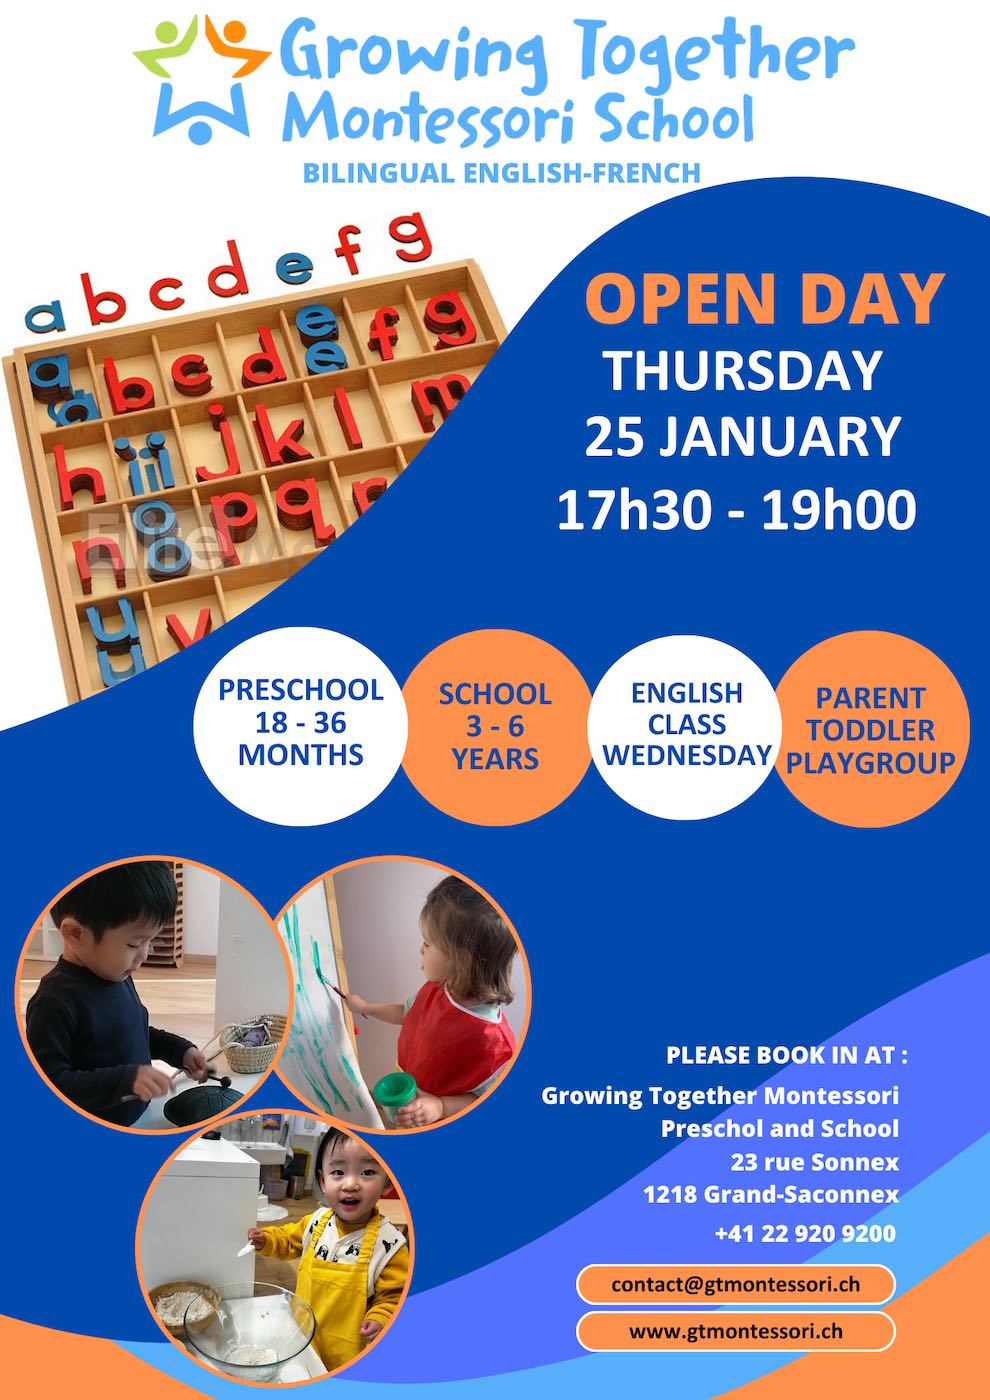 Open day flyer English copy